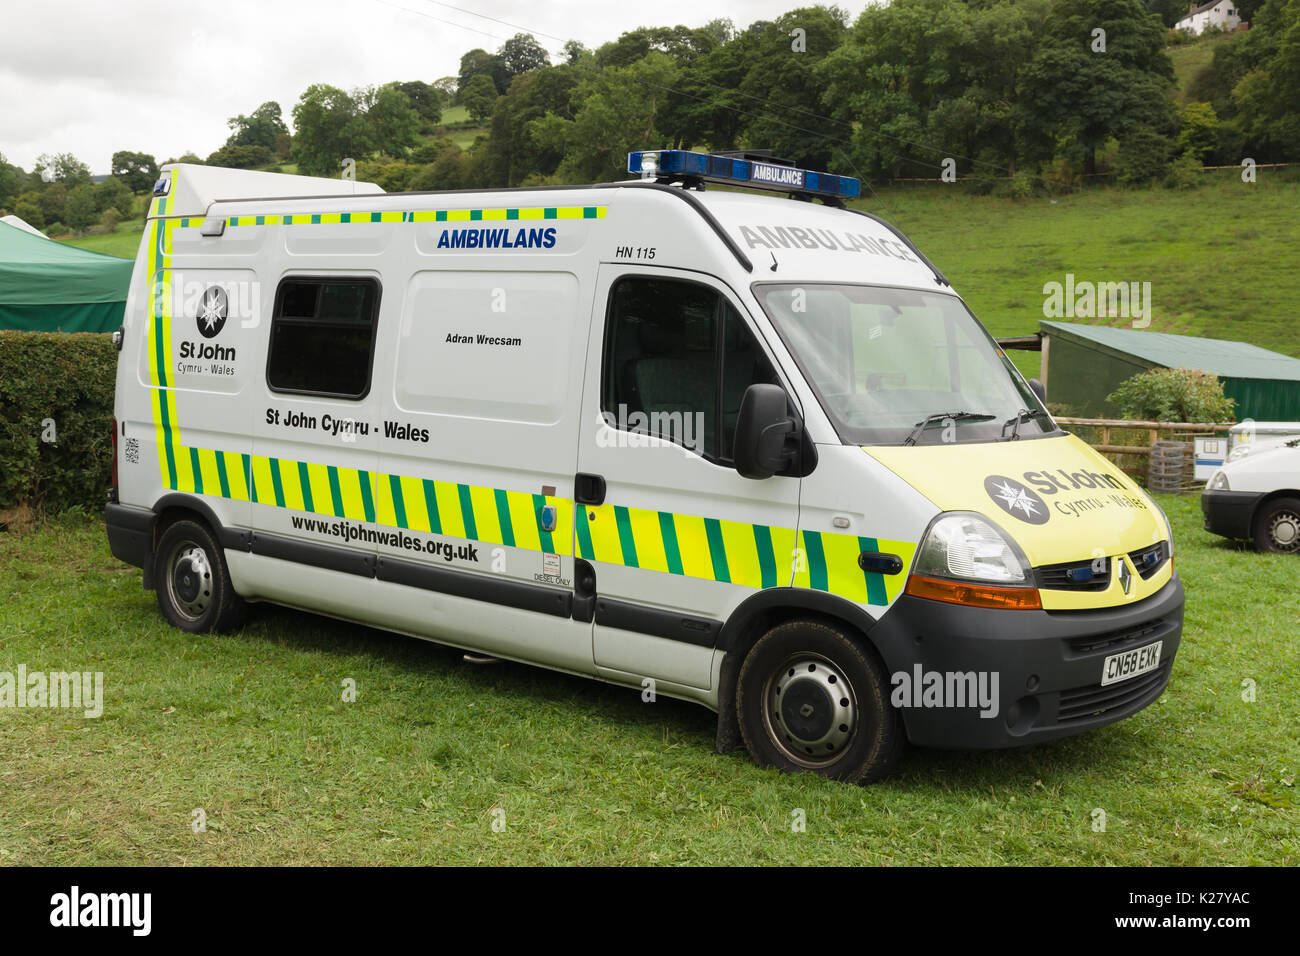 Saint John Ambulance vehicle at an outdoor event in Wales Saint John is a charity made up of volunteer medical staff that provides first aid at events Stock Photo